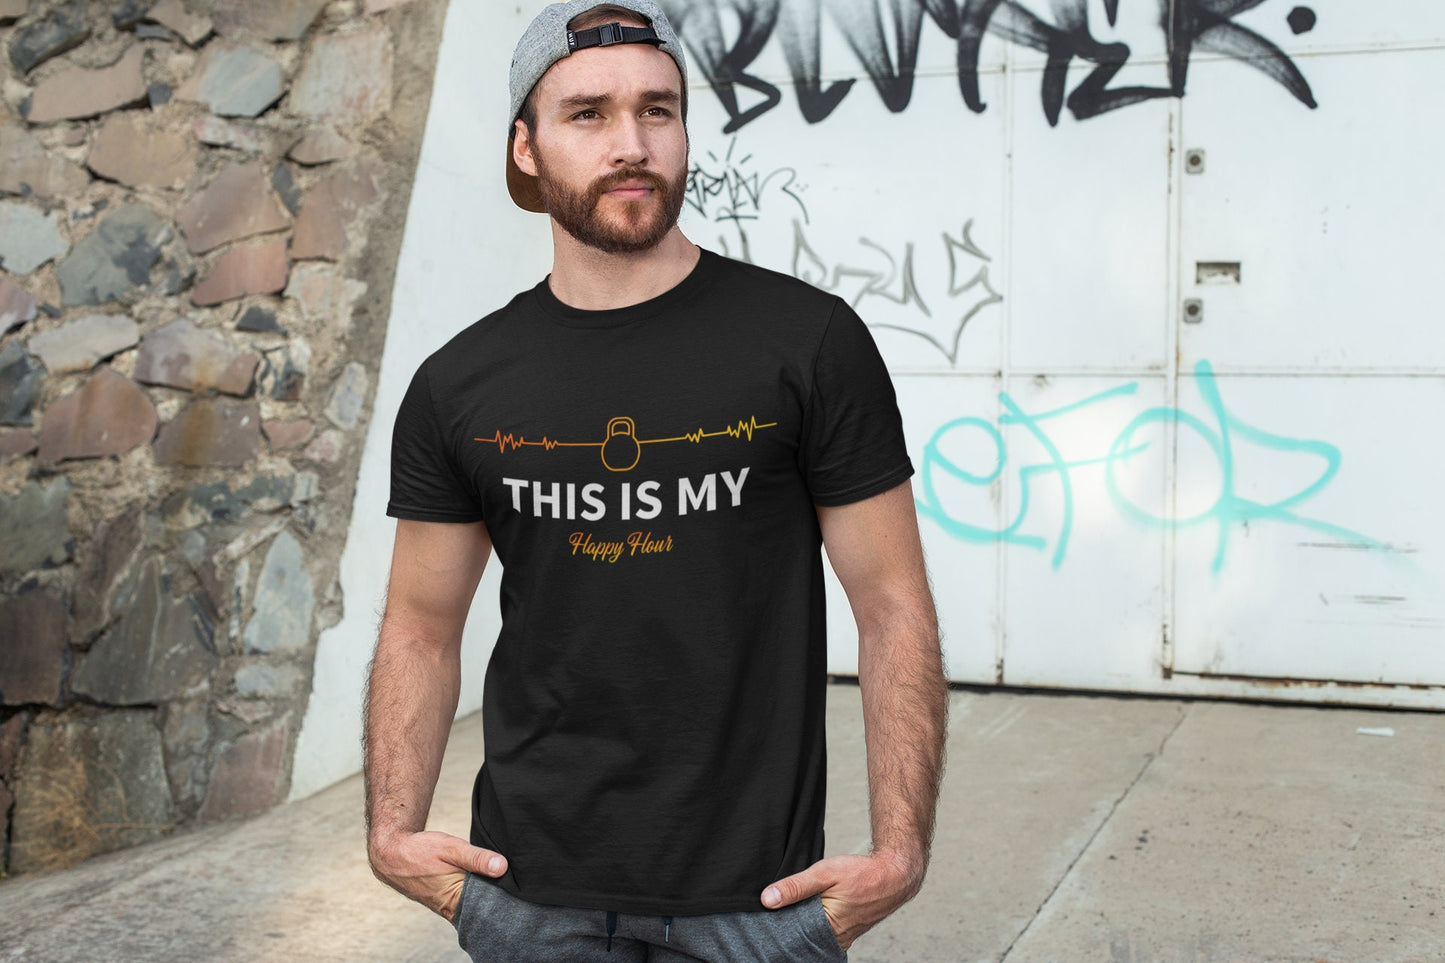 This is My Happy Hour - Kettlebell workout motivation gym shirt